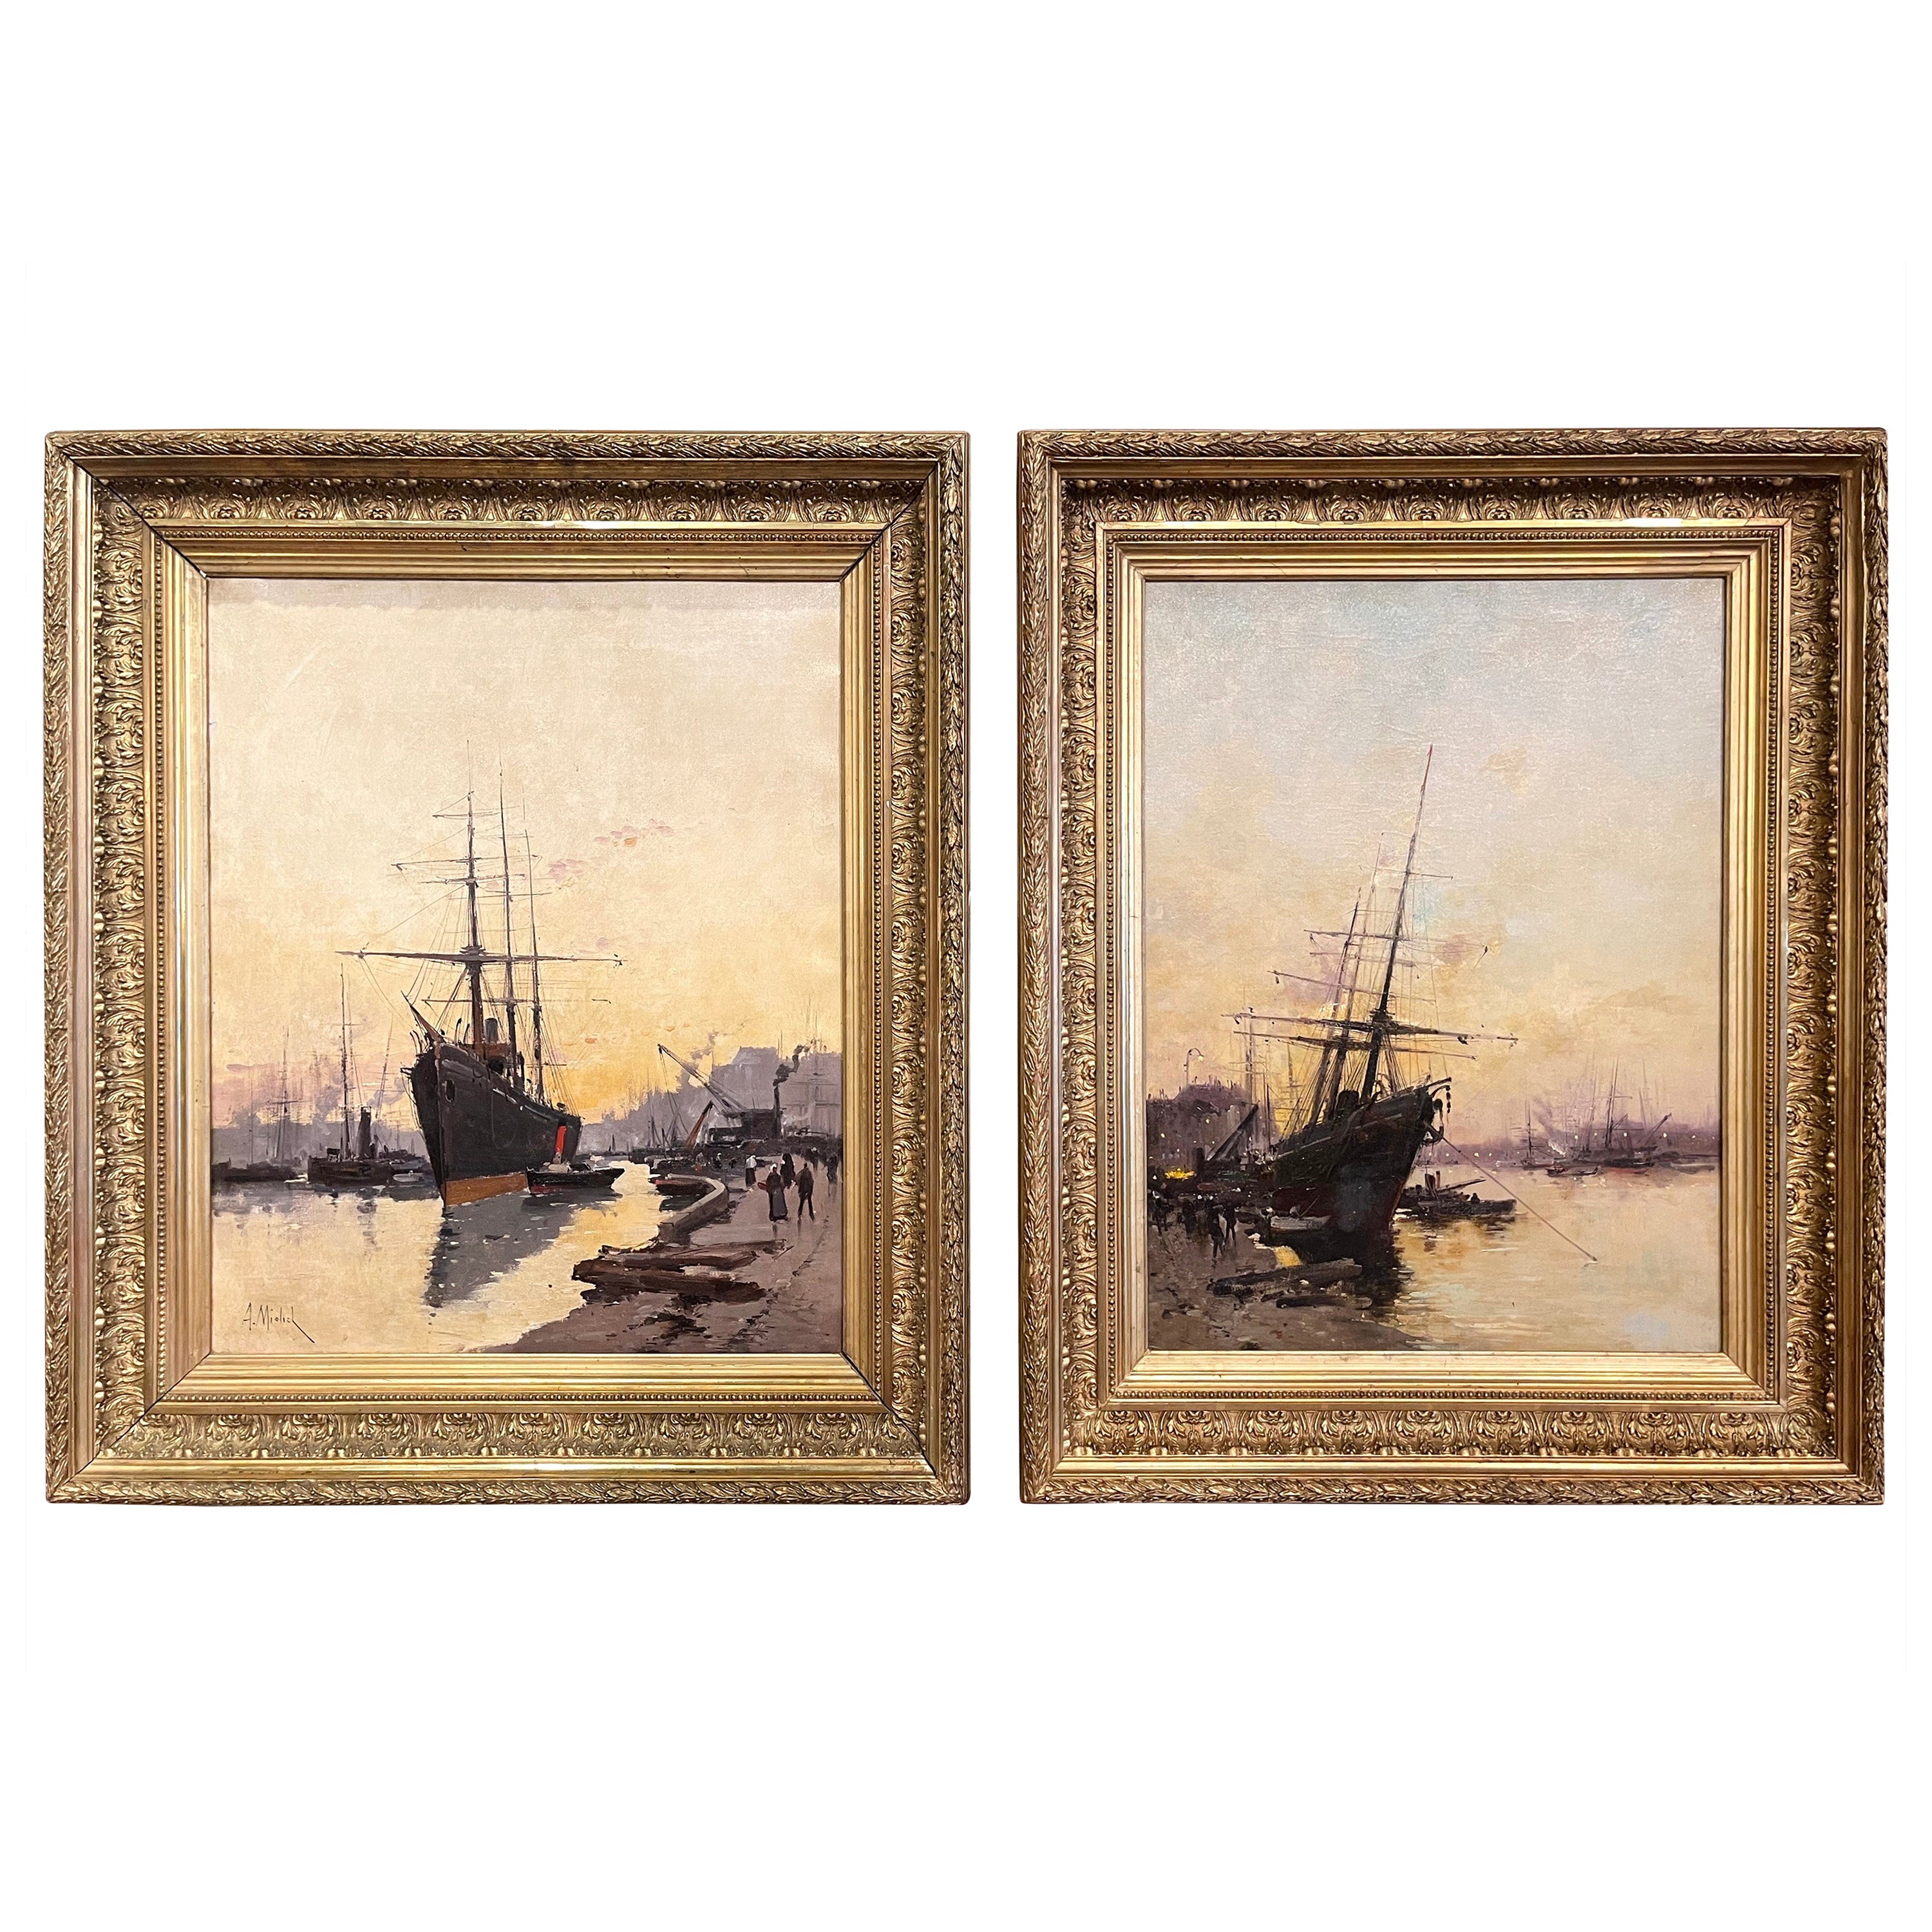 Pair of 19th Century Sailboat Oil Paintings Signed A Michel for E. Galien-Laloue